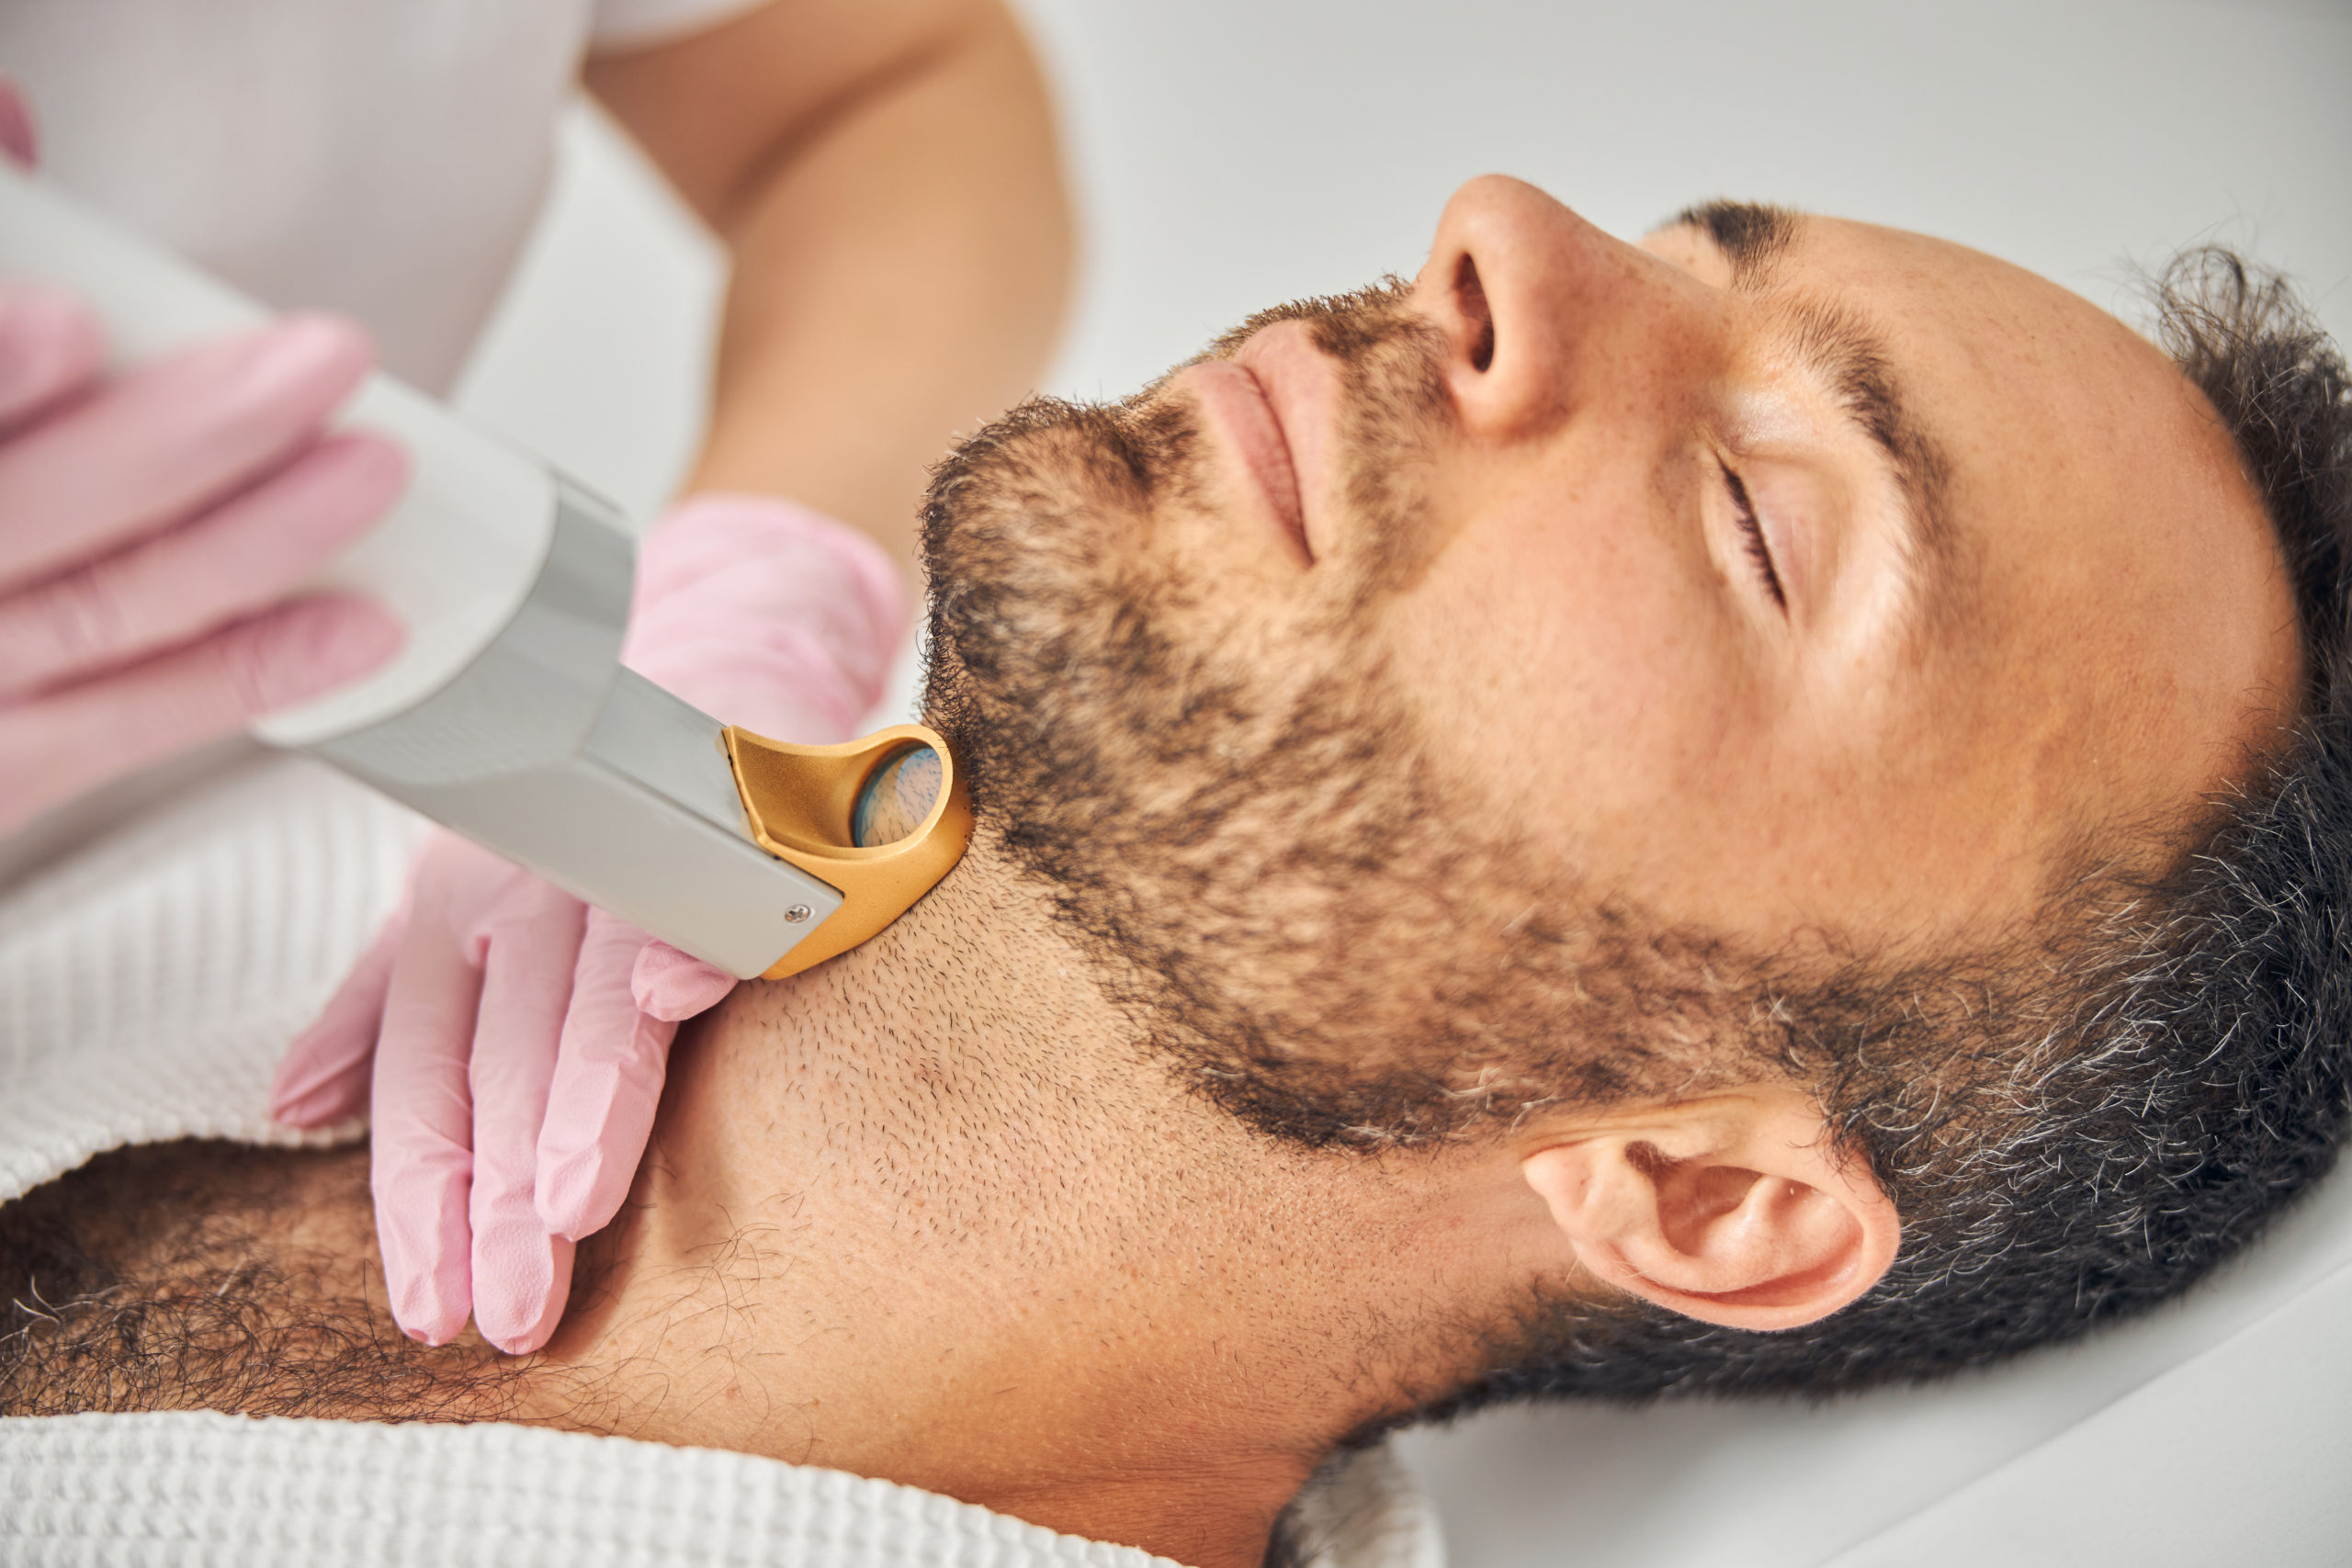 Ditch the Neck Hair: Laser Hair Removal for Men - Plastic Surgery Associates